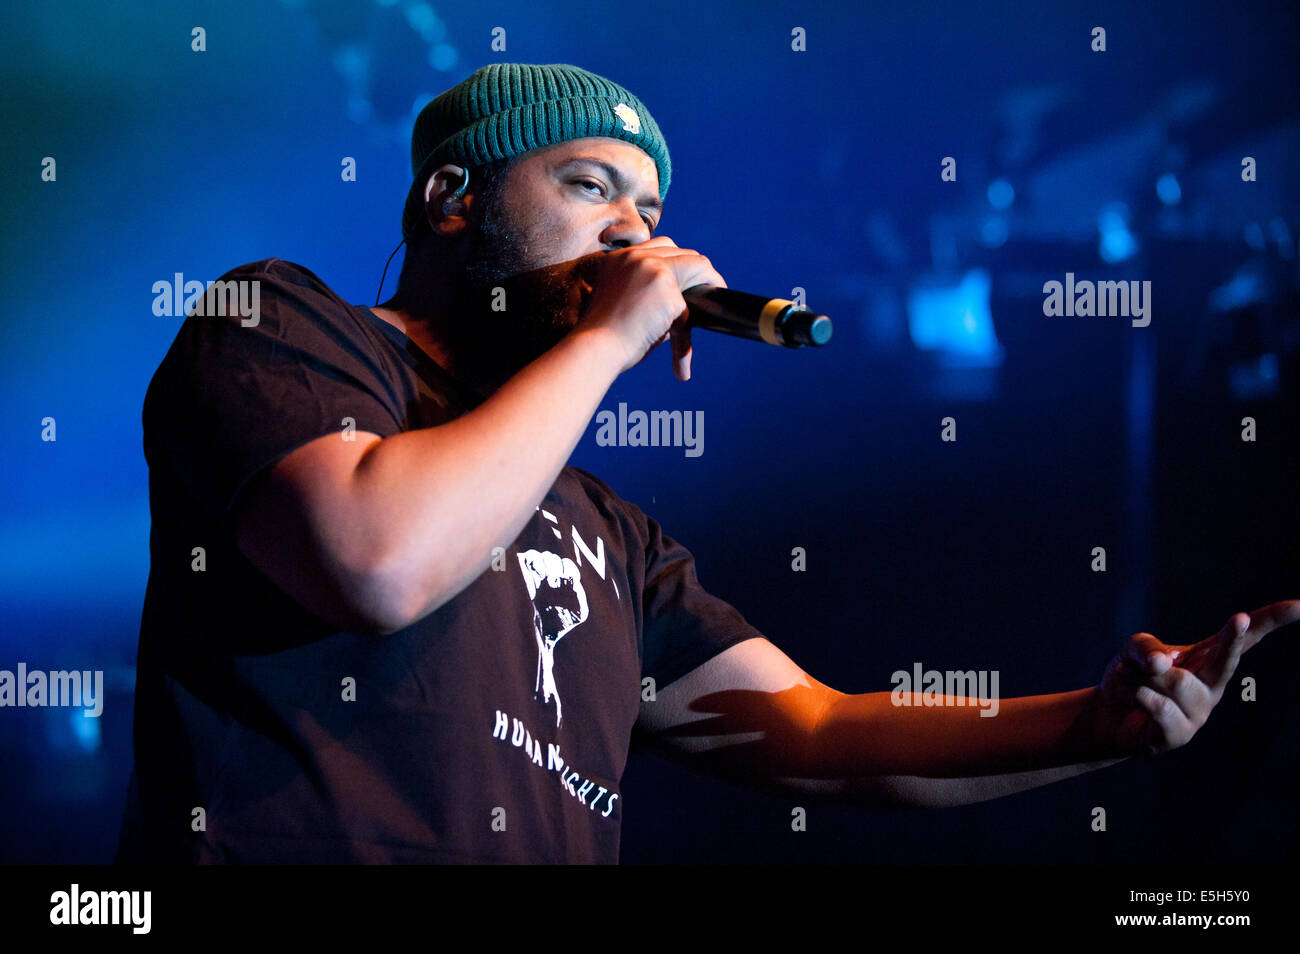 Freiburg, Germany. 31st July, 2014. German rapper and hip hop artist from Hamburg Samy Deluxe performed live with his band Dlx at the ZMF music festival in Freiburg, Germany. Photo: Miroslav Dakov/ Alamy Live News Stock Photo